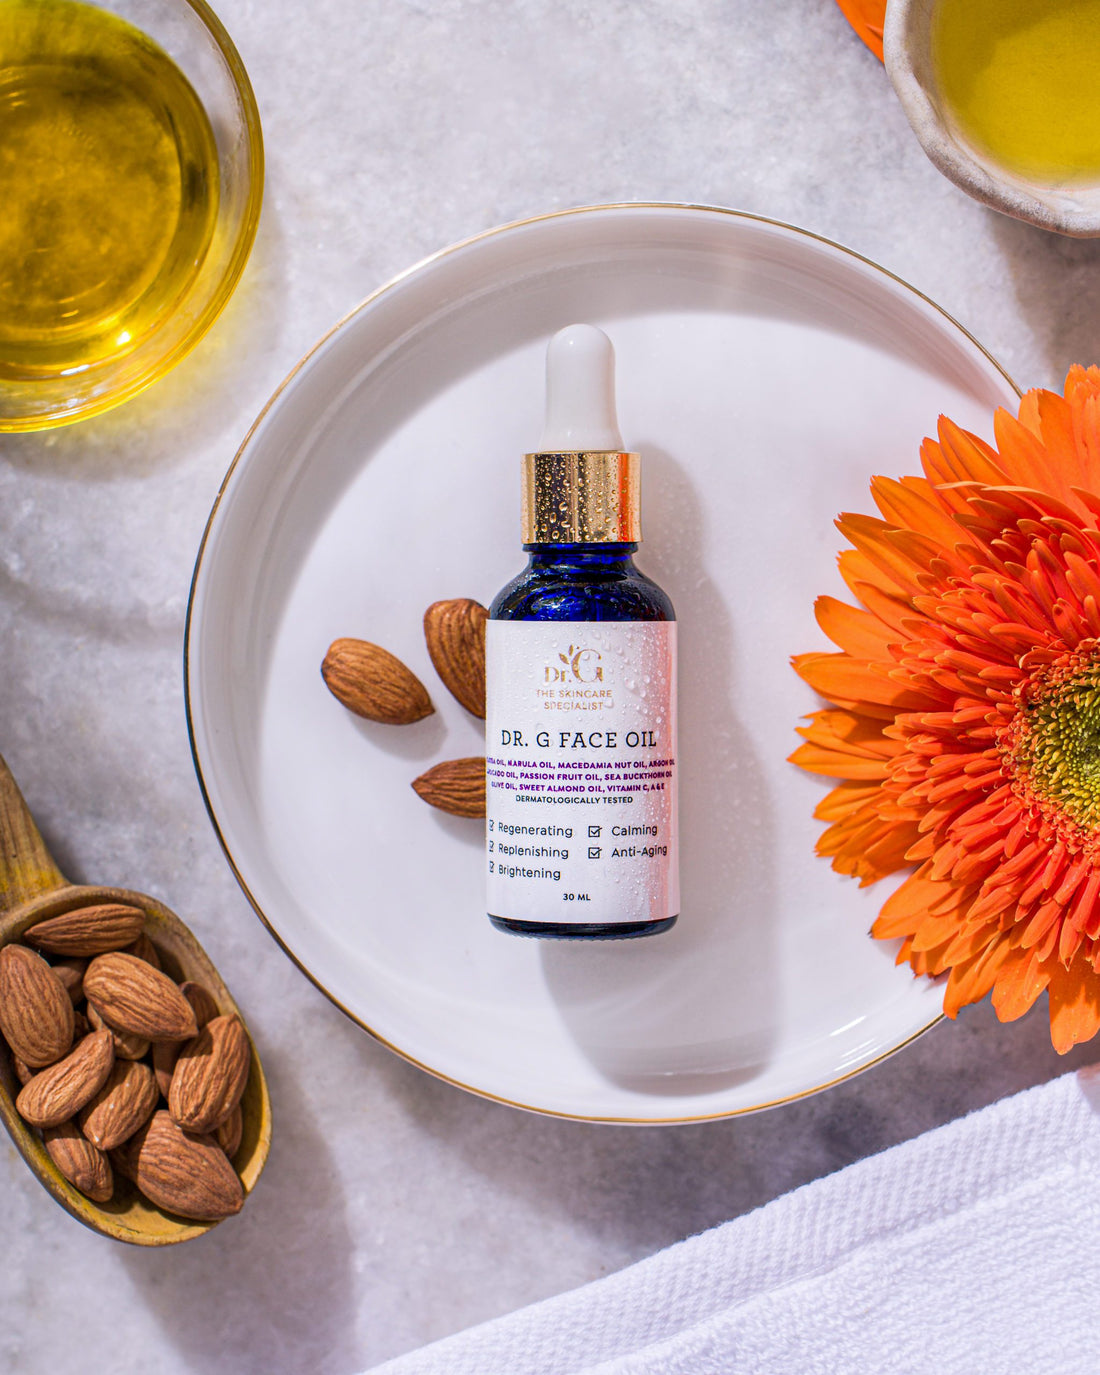 Sweet Almond Oil for Skin: A Cure for Winter Dryness